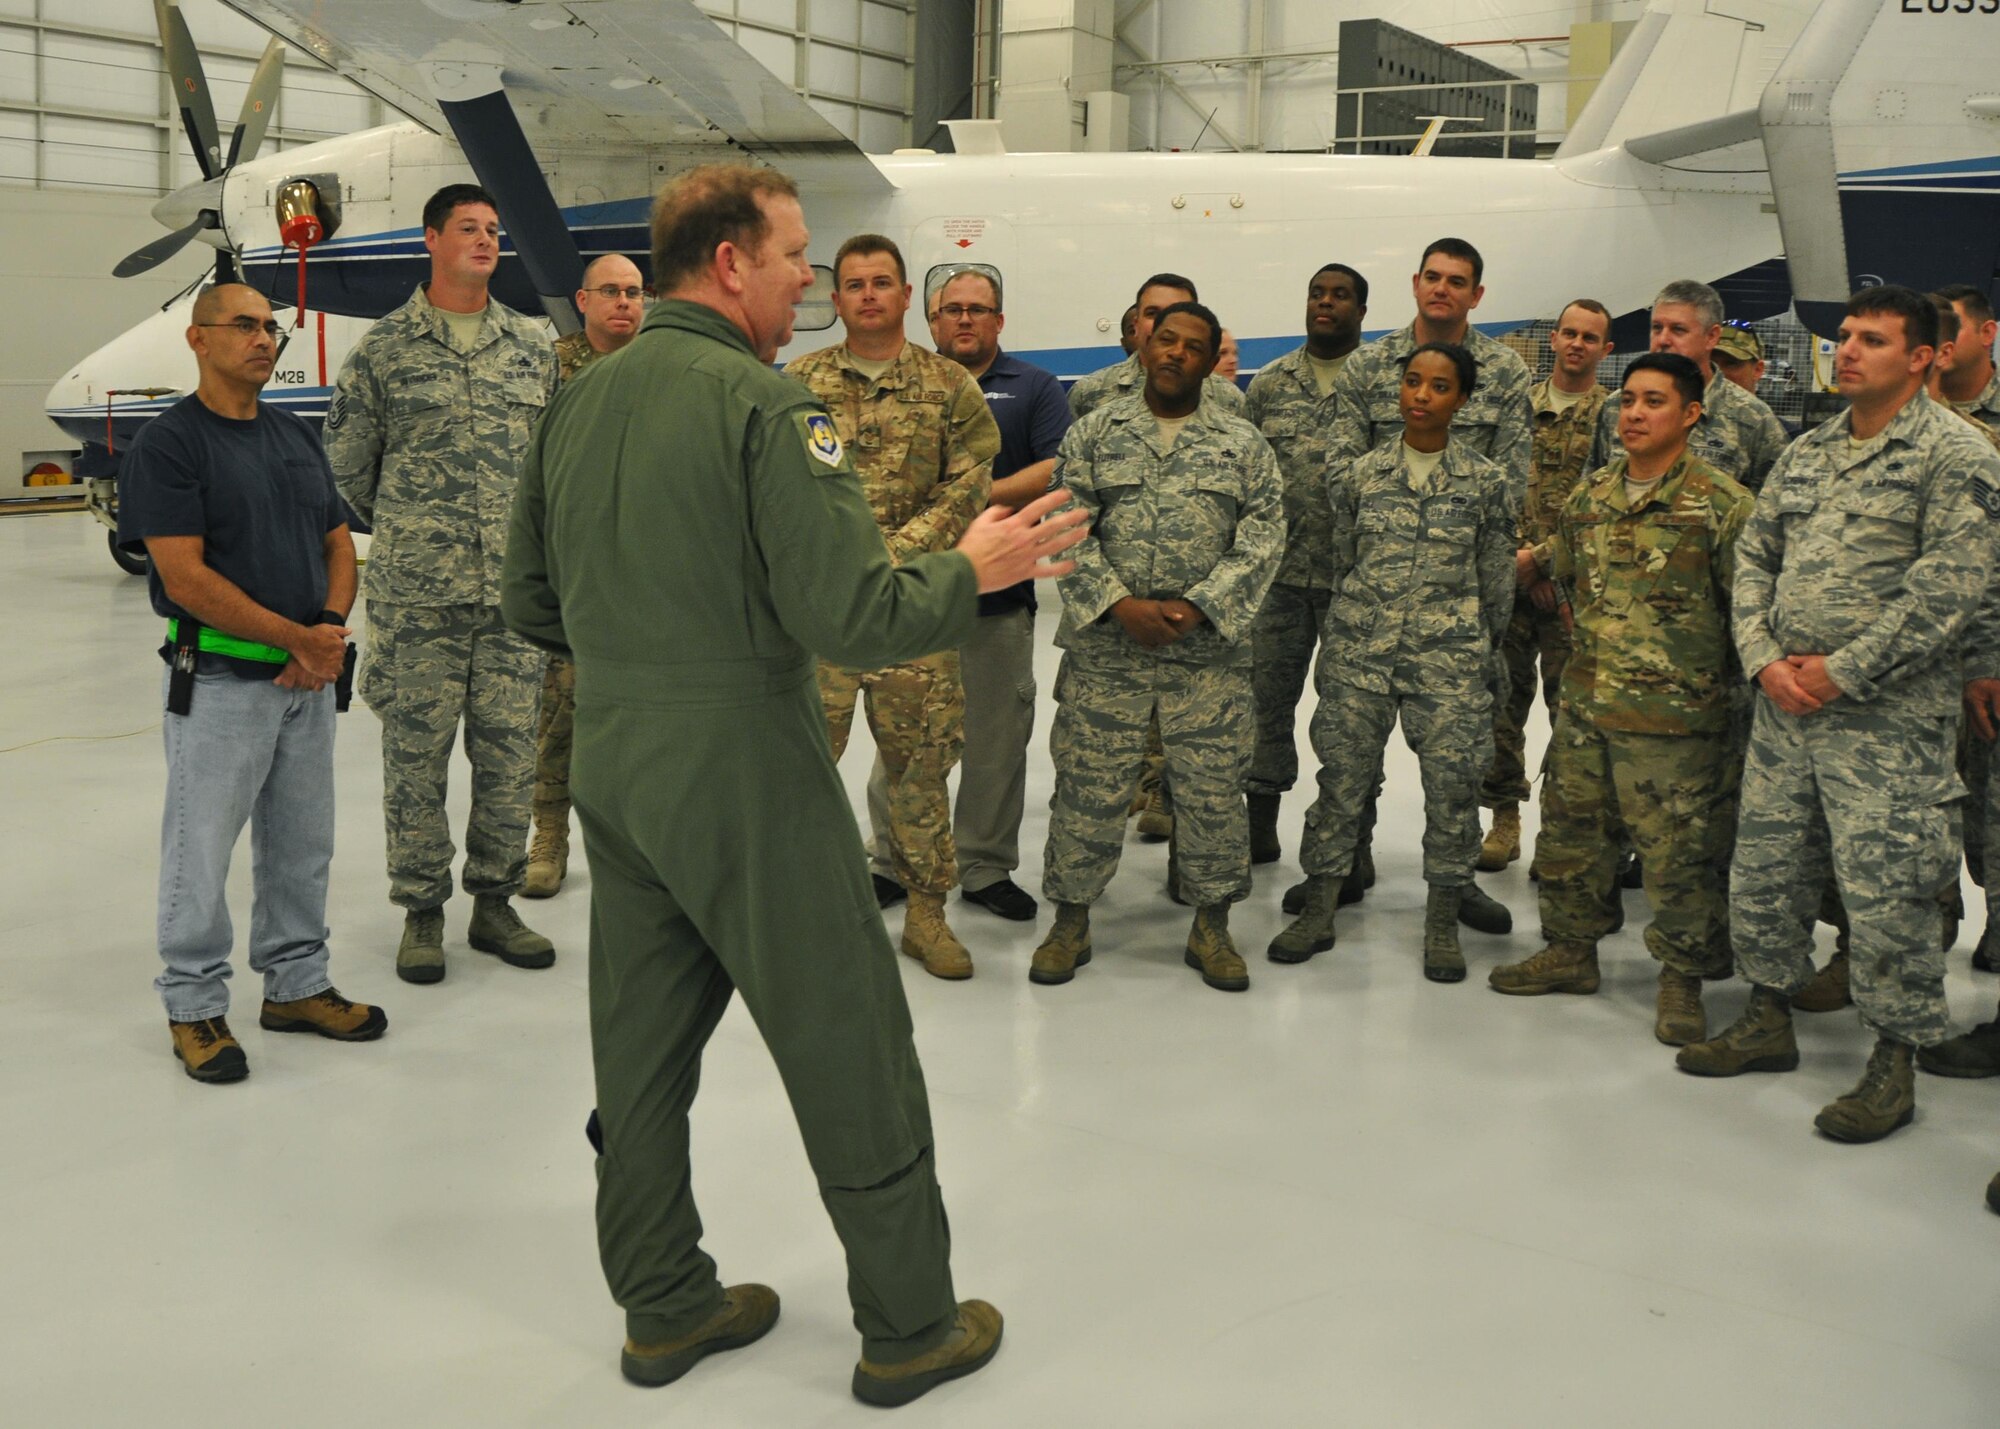 Maj. Gen. Richard Scobee, 10th Air Force commander, visits maintainers in a hangar at Duke Field, Fla., Jan. 19, 2017. During his visits to Citizen Air Commandos at Duke and Hurlburt Field, Scobee held a wing assembly and visited many of them at their work centers to observe and thank them for the work they do for the 919th Special Operations Wing’s diverse mission sets. (U.S. Air Force photo/Dan Neely)